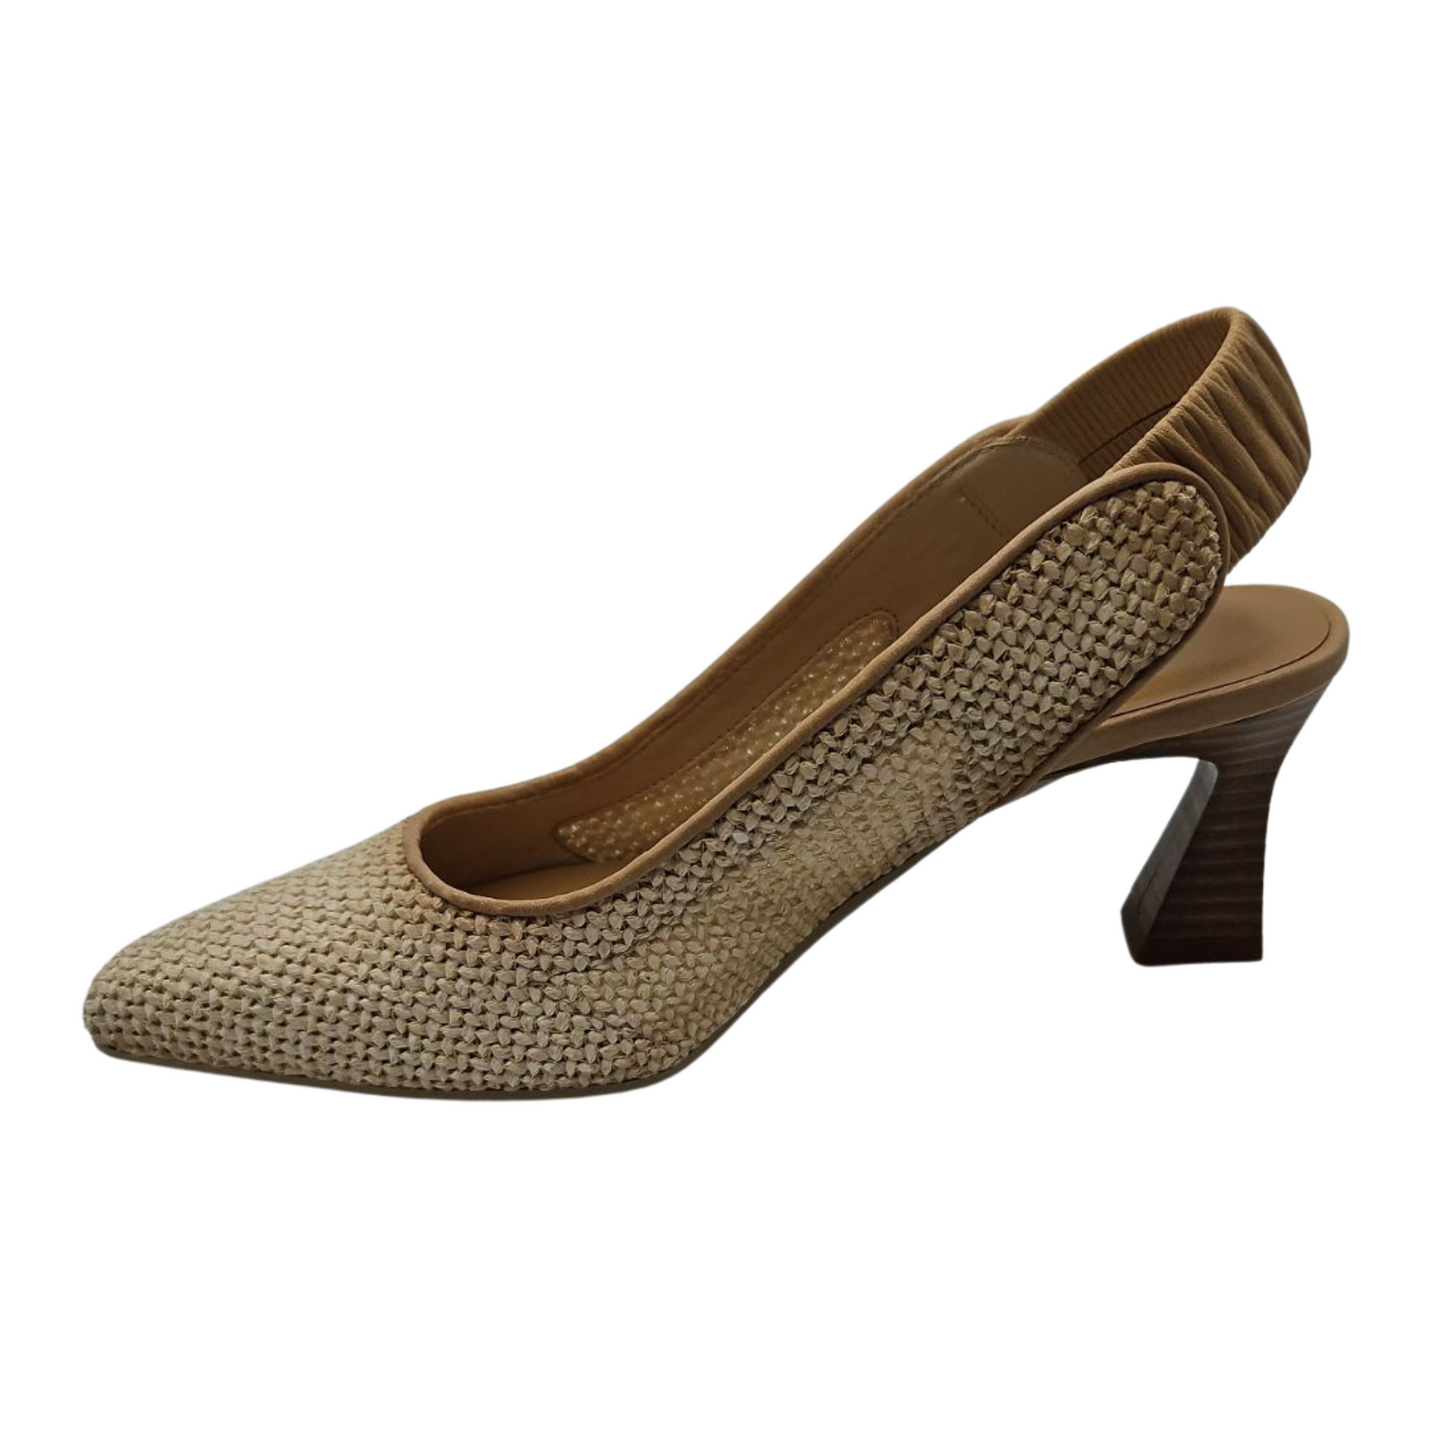 Left facing view of cream coloured woven pump with flared heel and elastic slingback strap